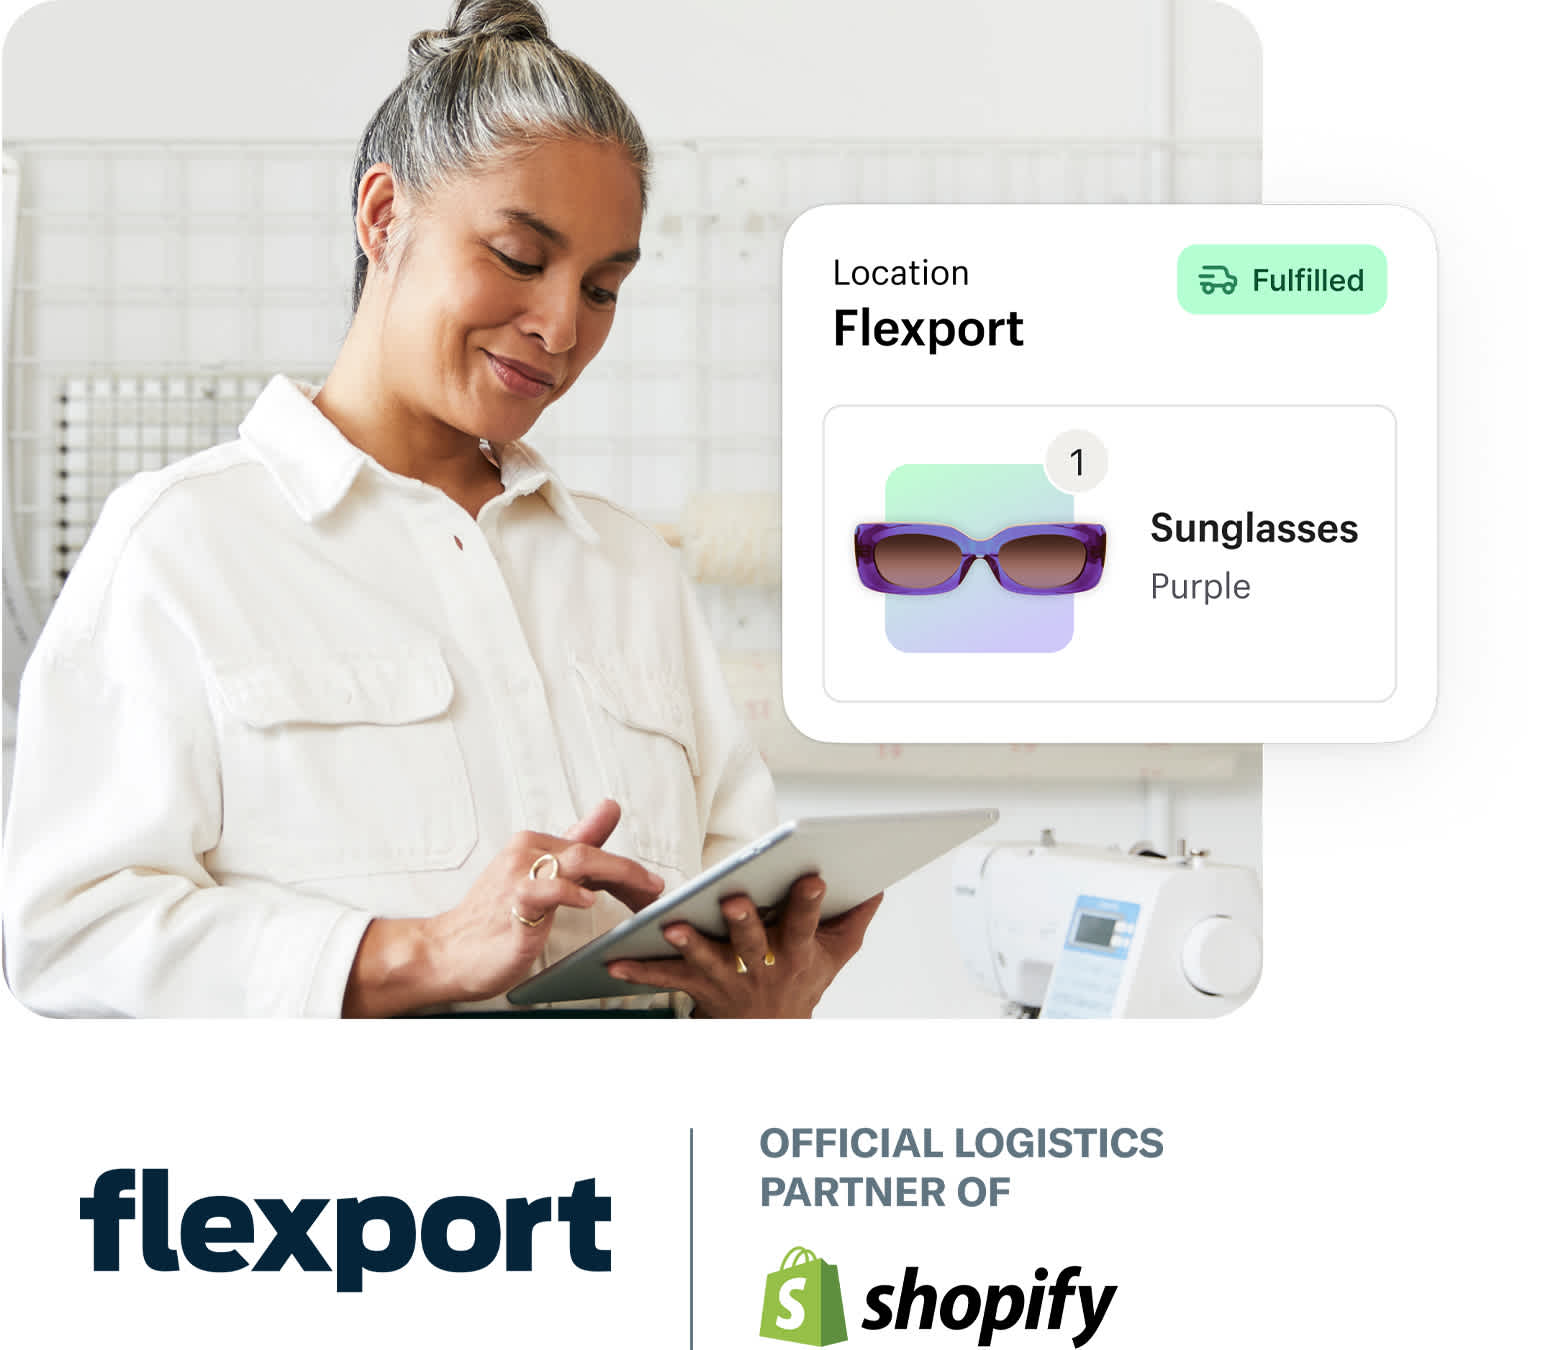 Shopify Merchants Can Save up to $1 Million with Flexport Fulfillment